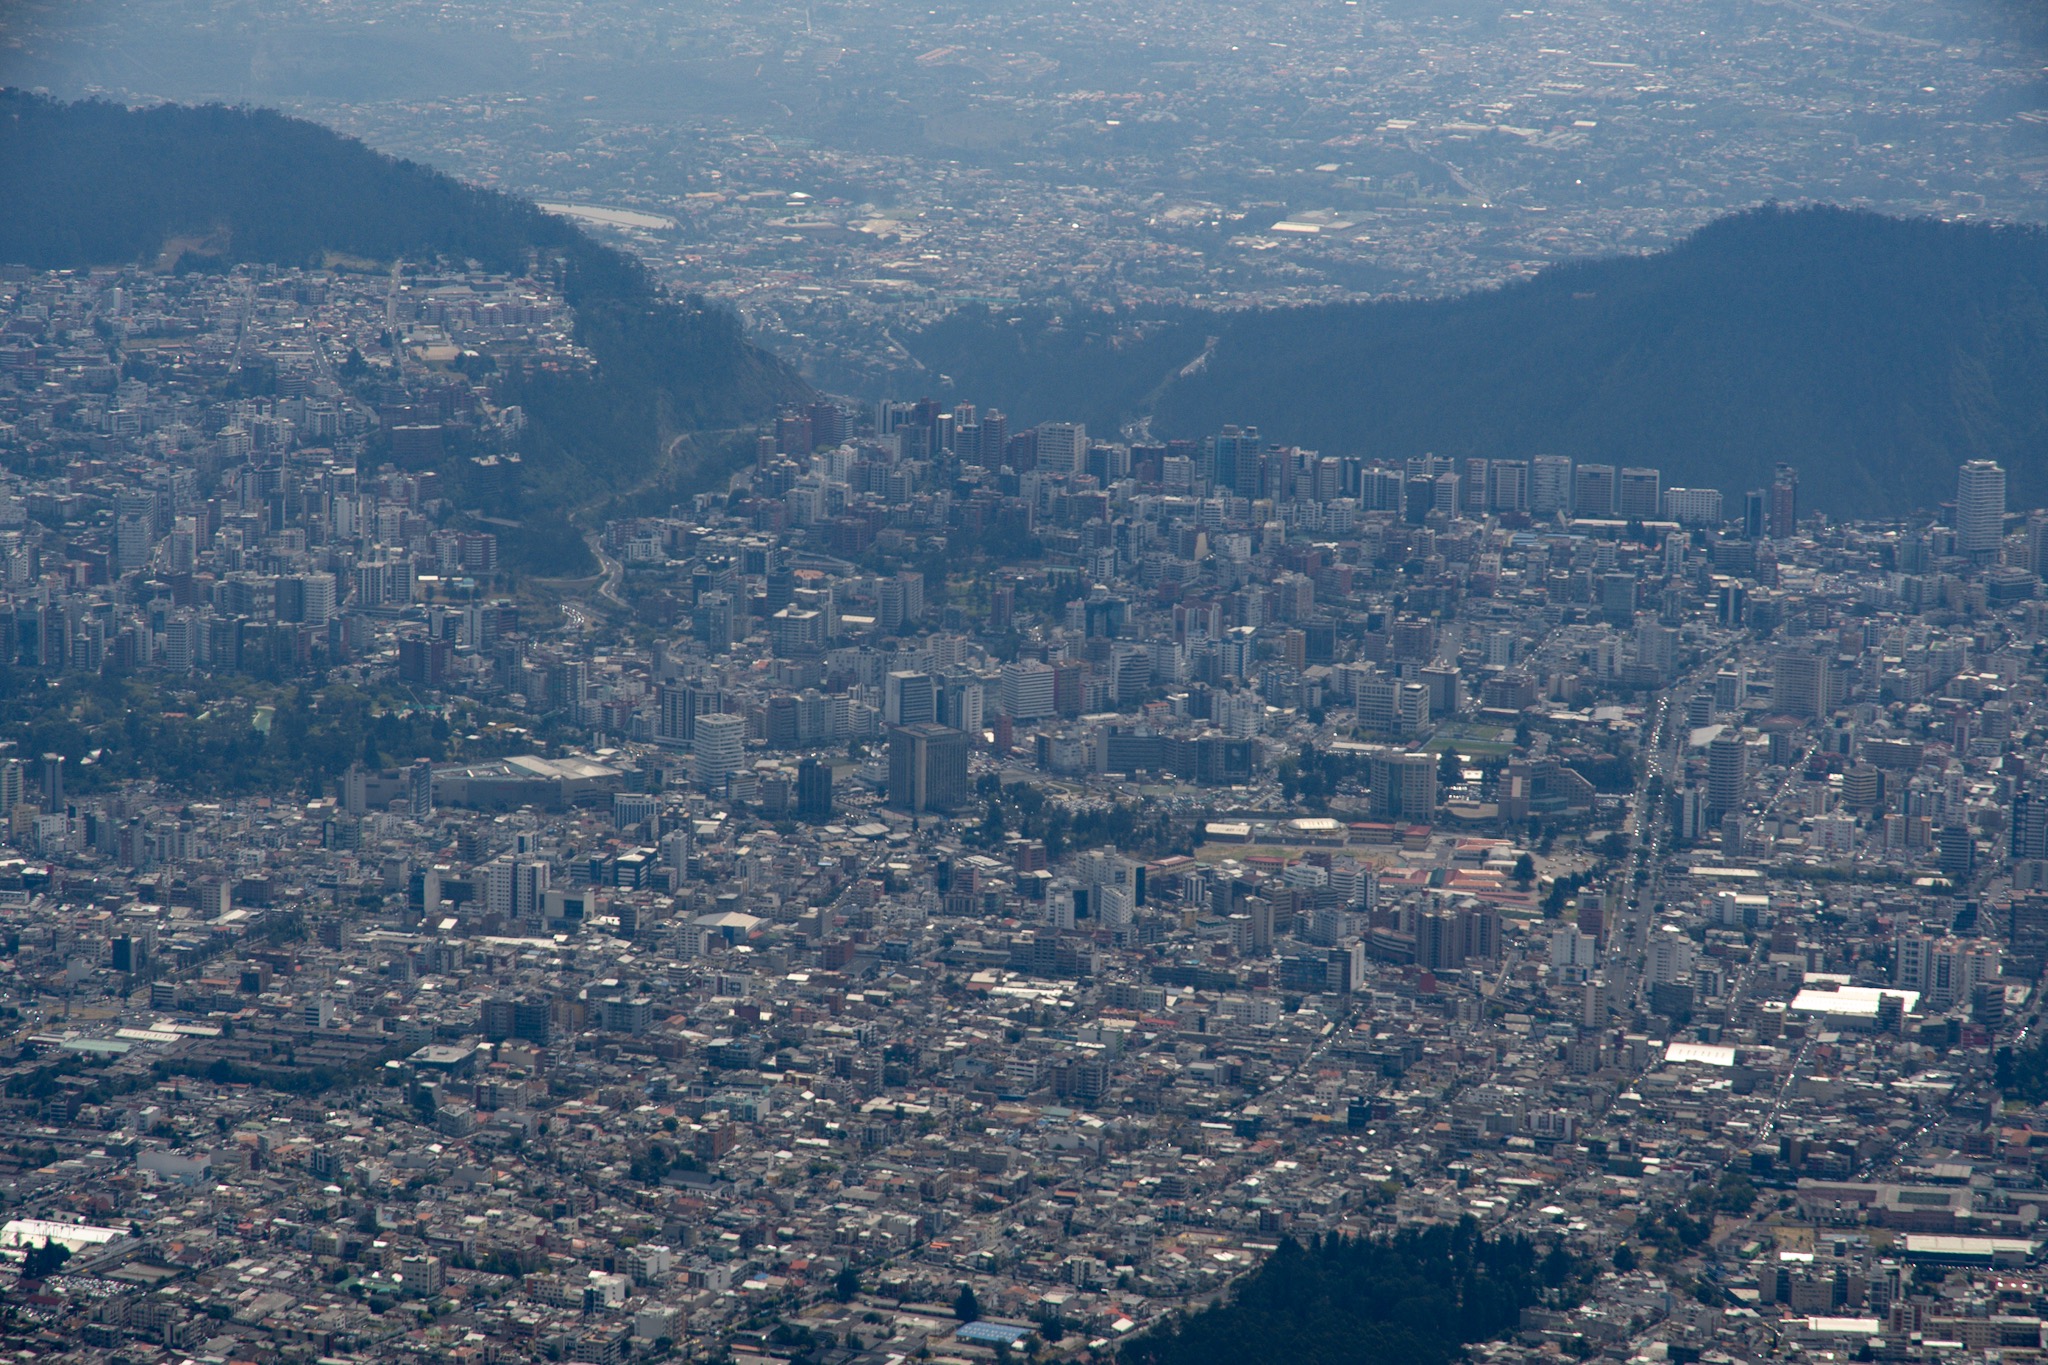 The north part of Quito.